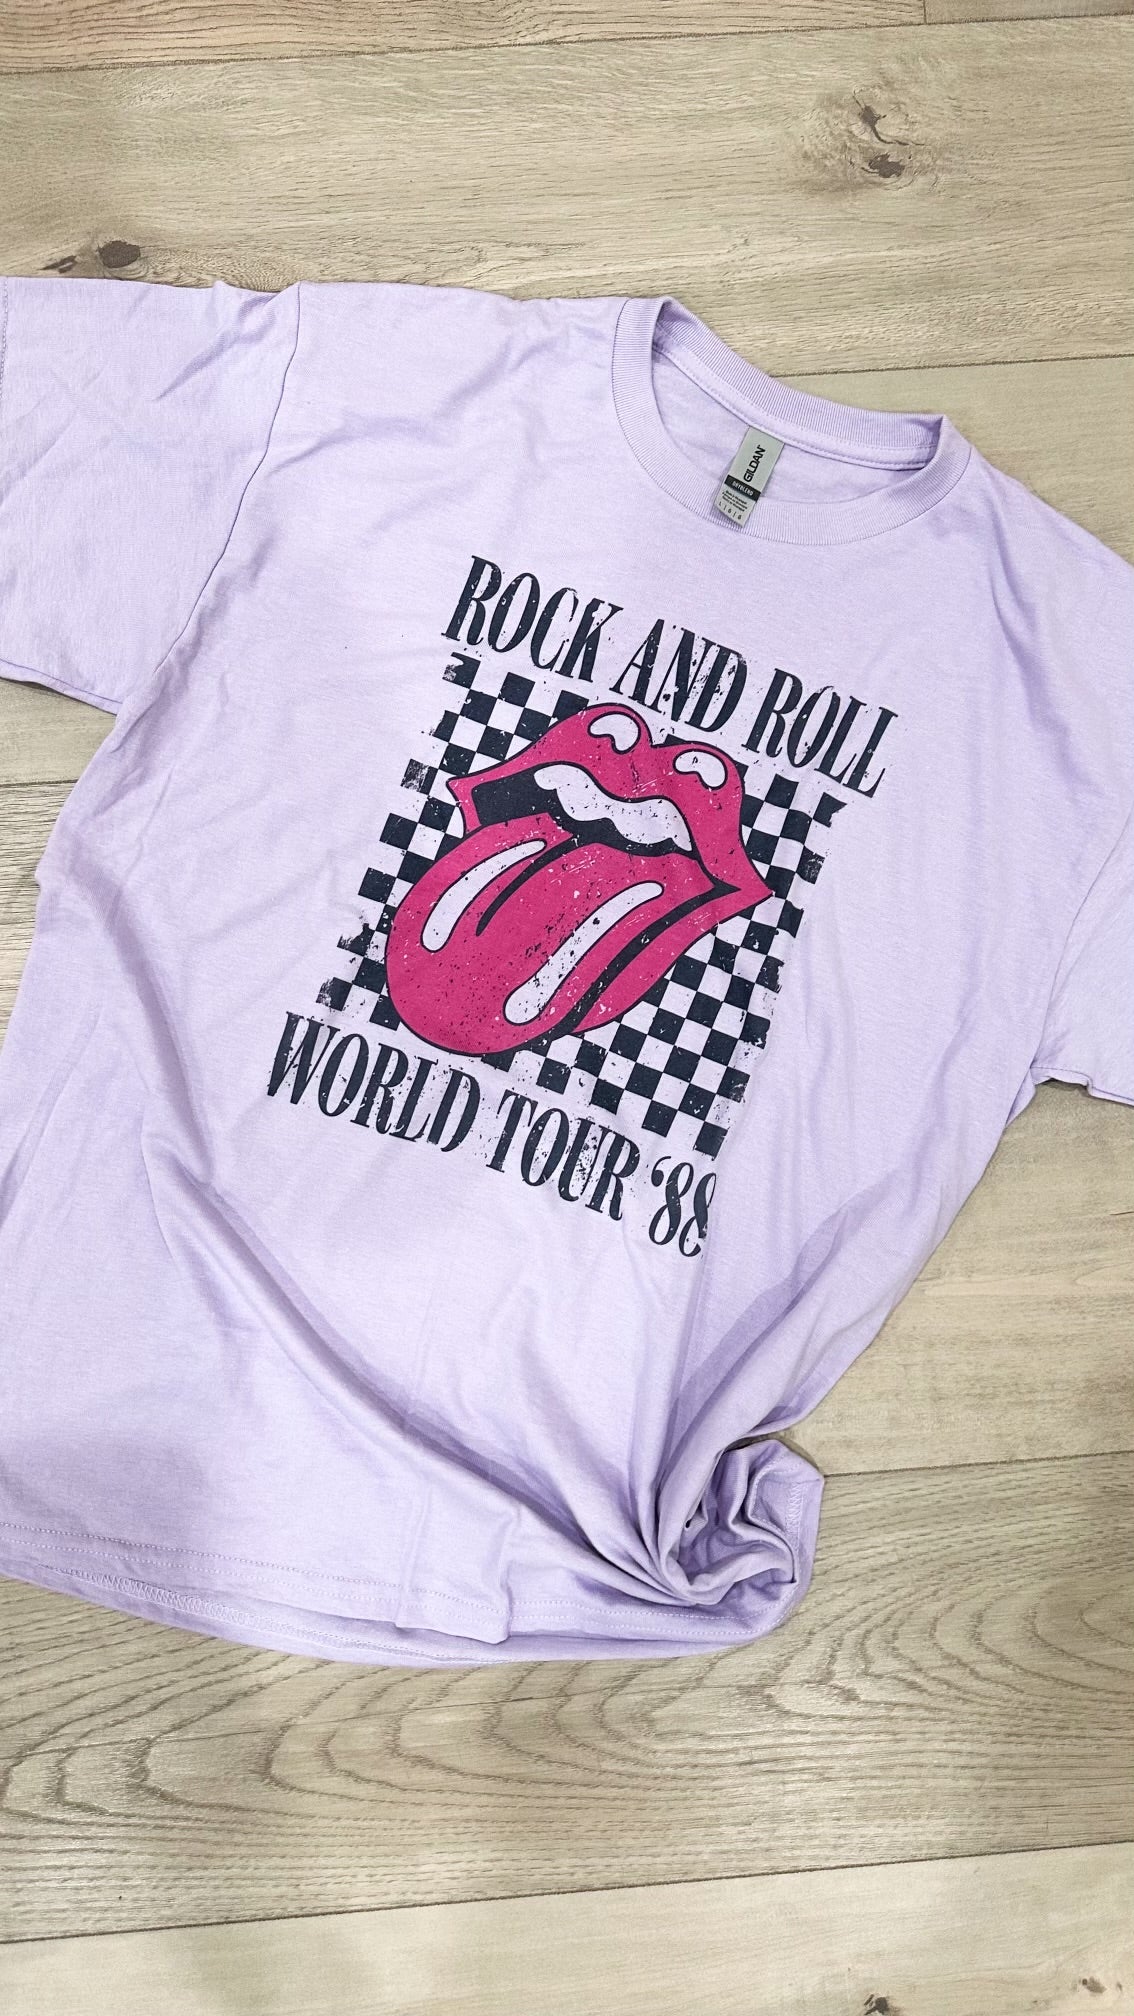 Rock & Roll World Tour Graphic